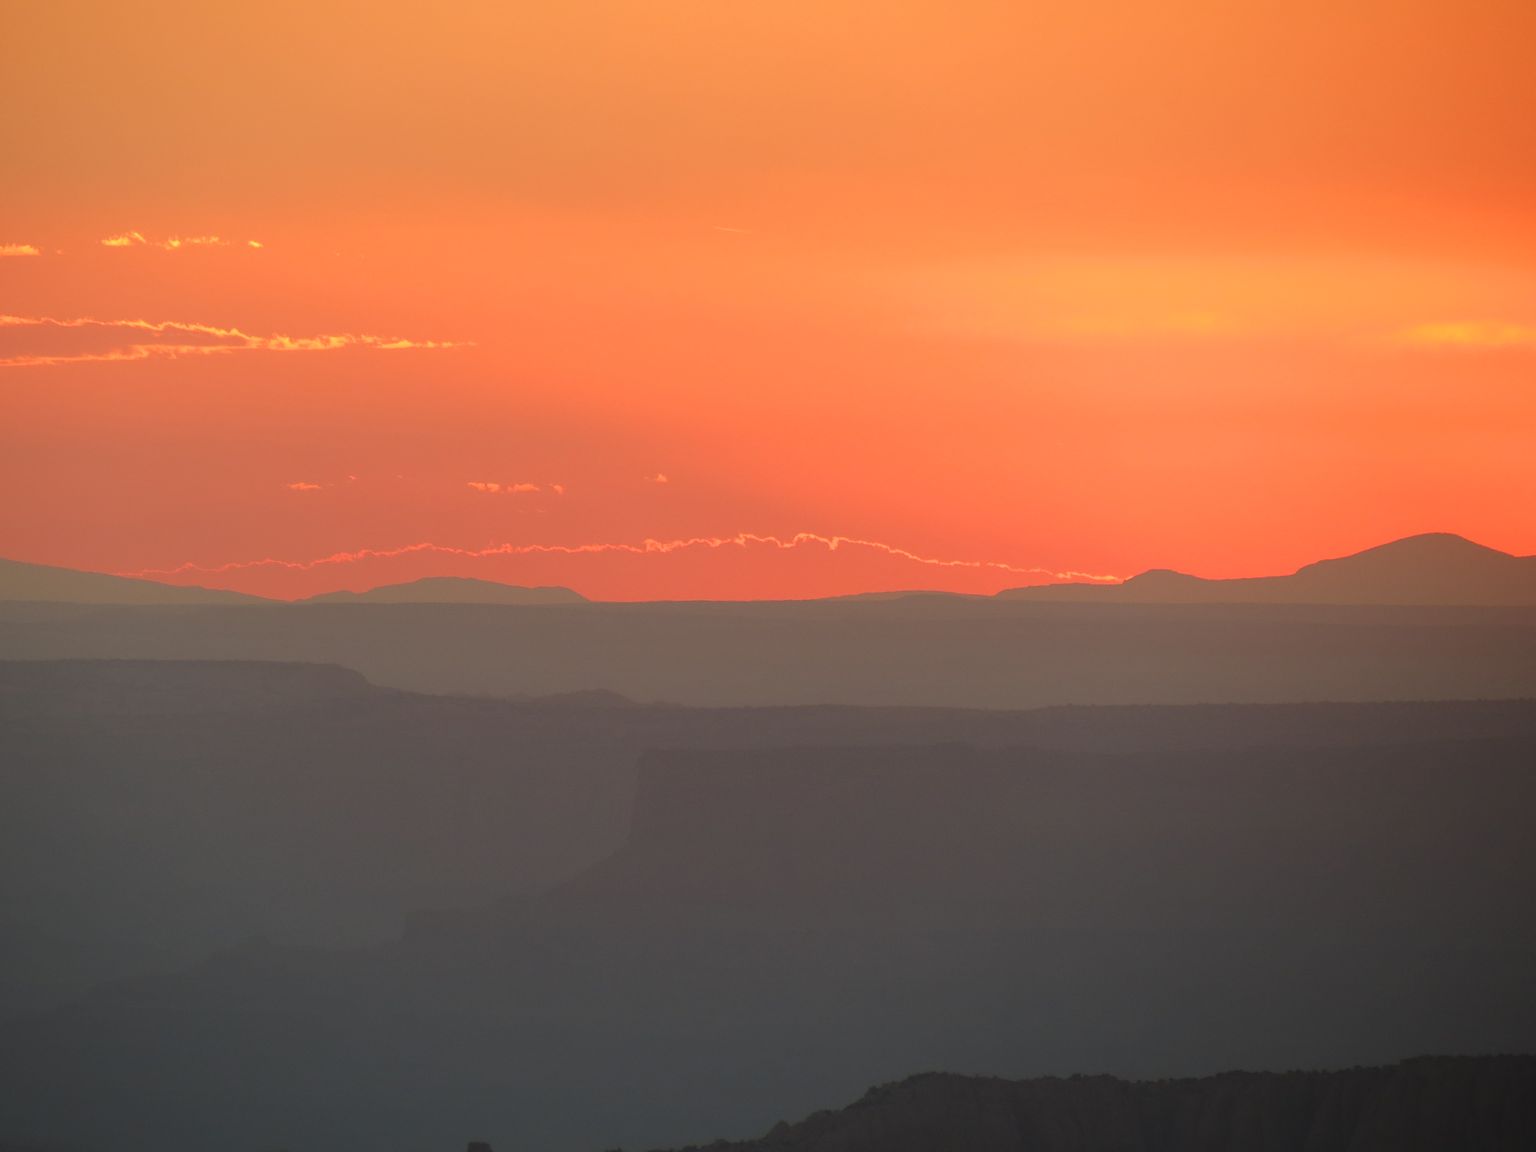 Sunset over Canyonlands, seen from the LaSal Mountains